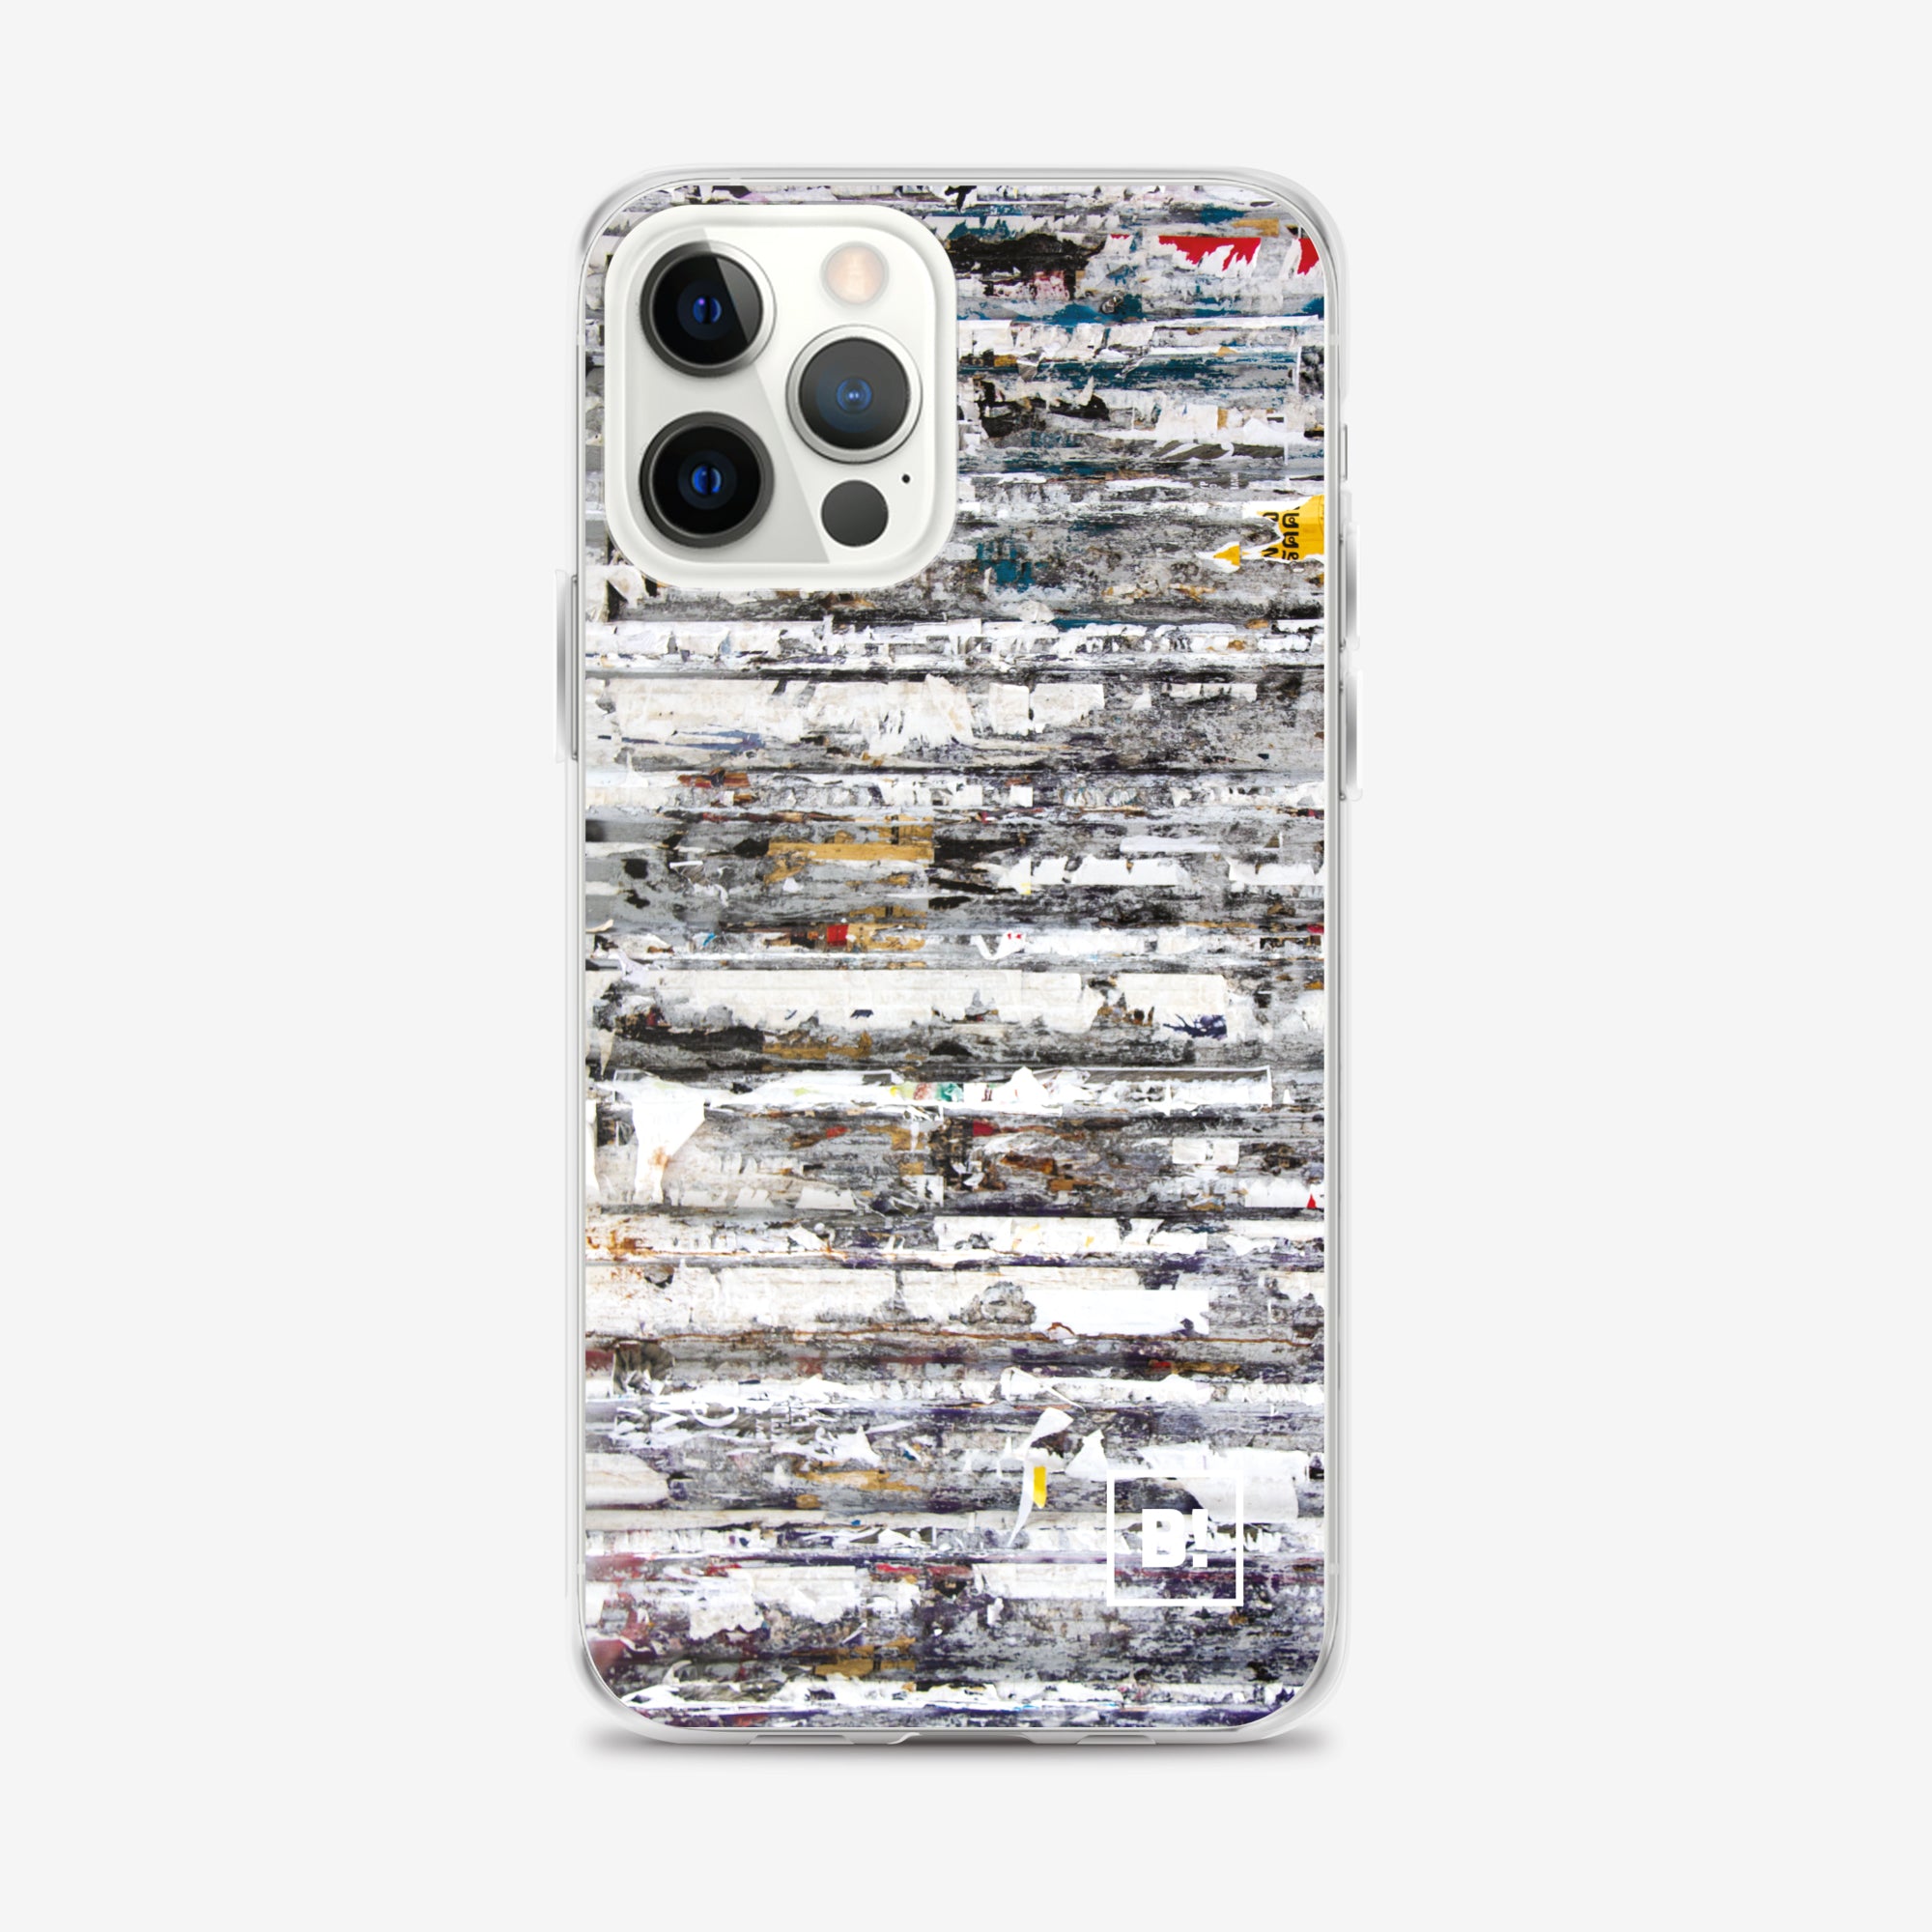 Binspired Ratchathewi - No1 - iPhone 12 Pro Max Clear Case